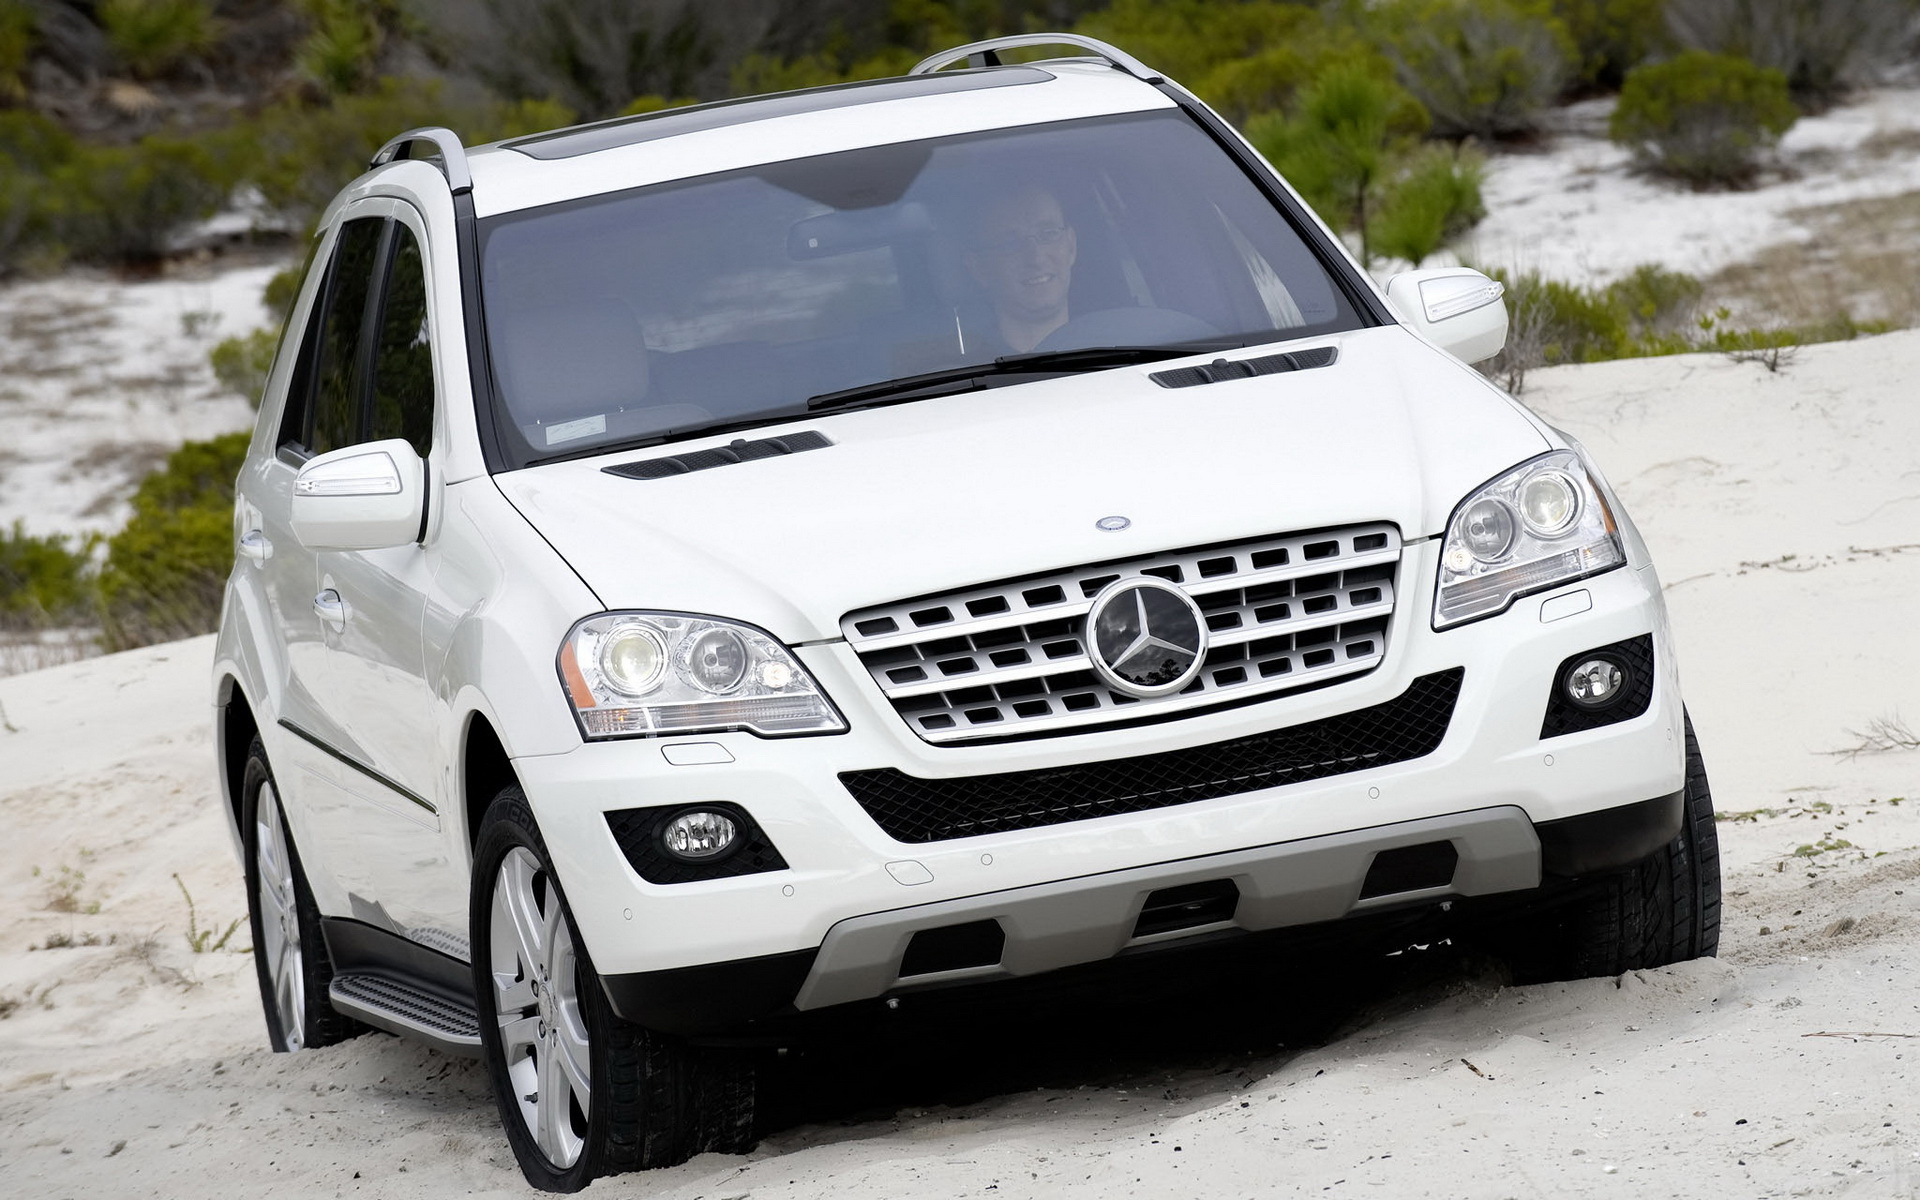 Mercedes Benz Ml320 Wallpaper And Image